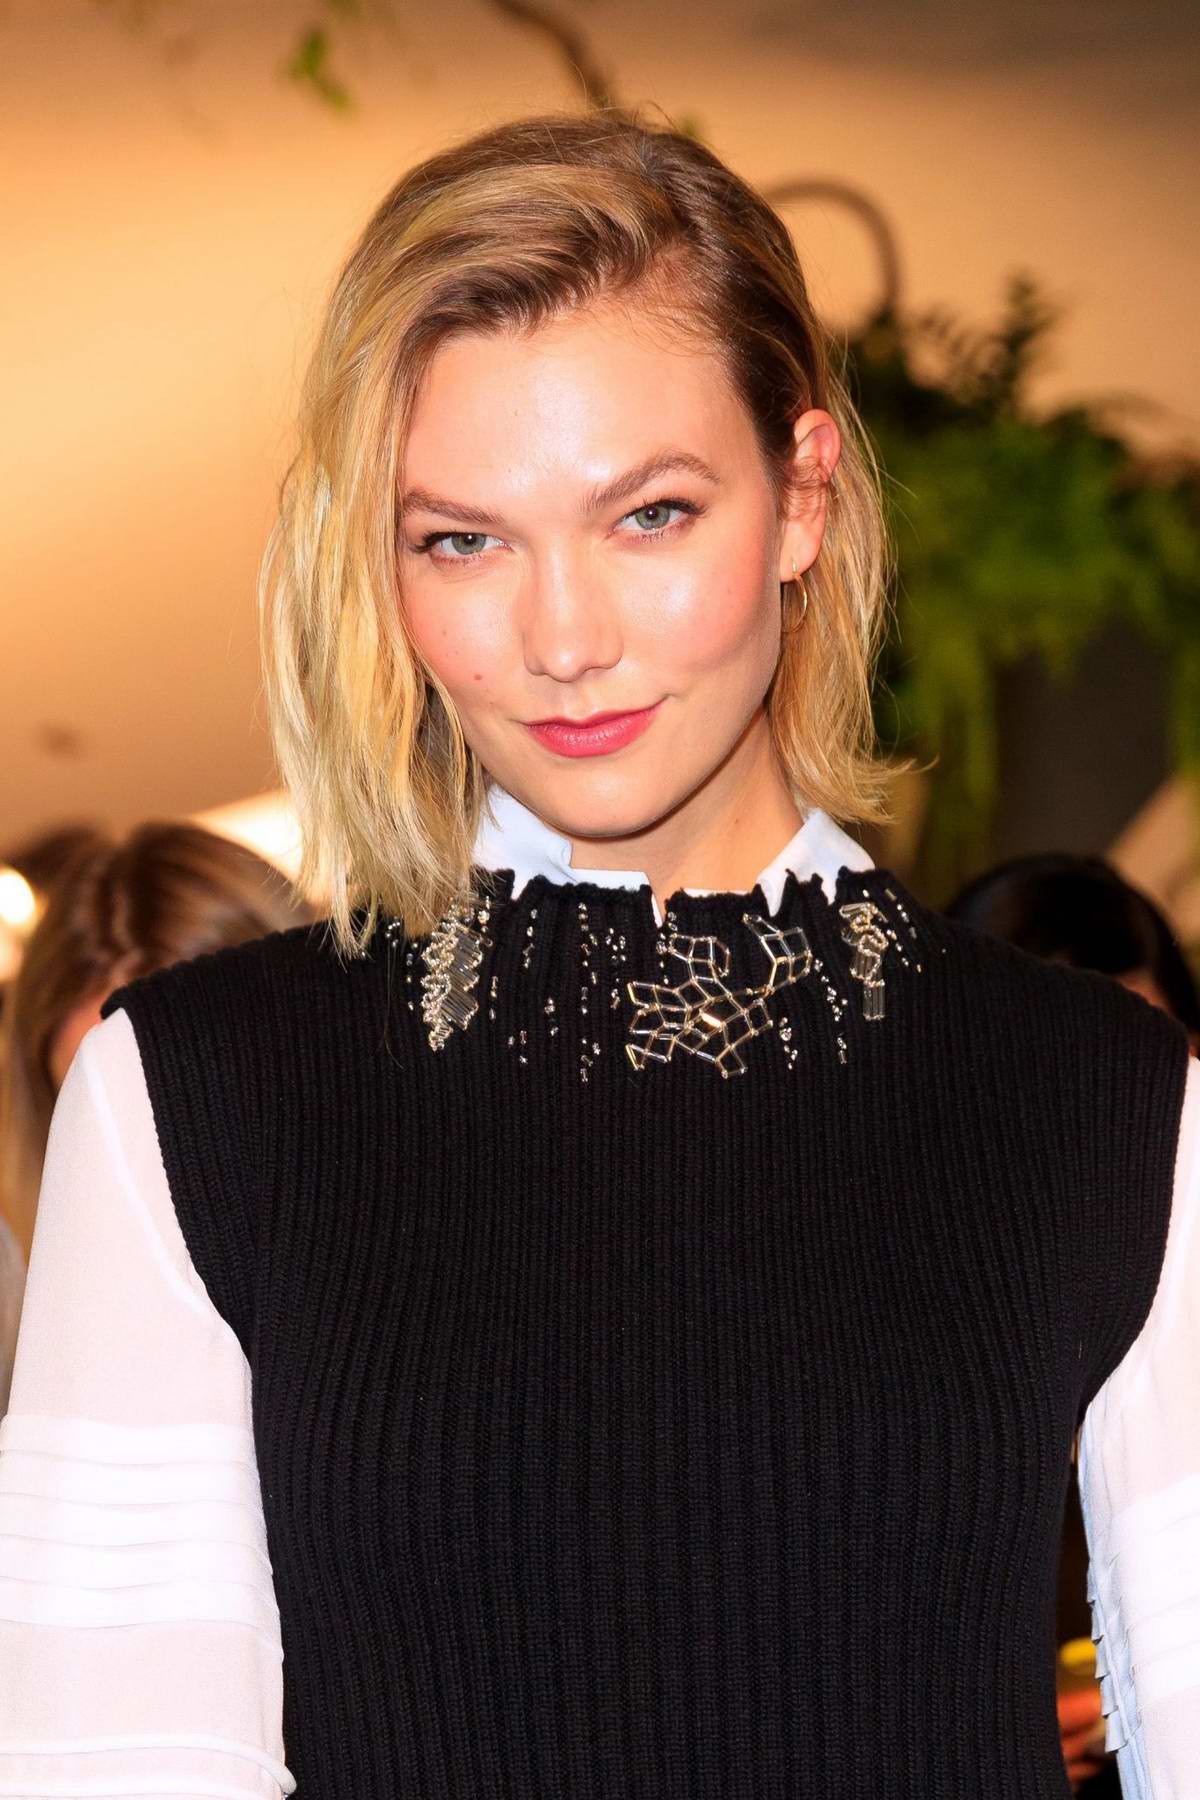 karlie kloss attends louis vuitton cruise 2020 fashion show at jfk airport in new york city-080519_6